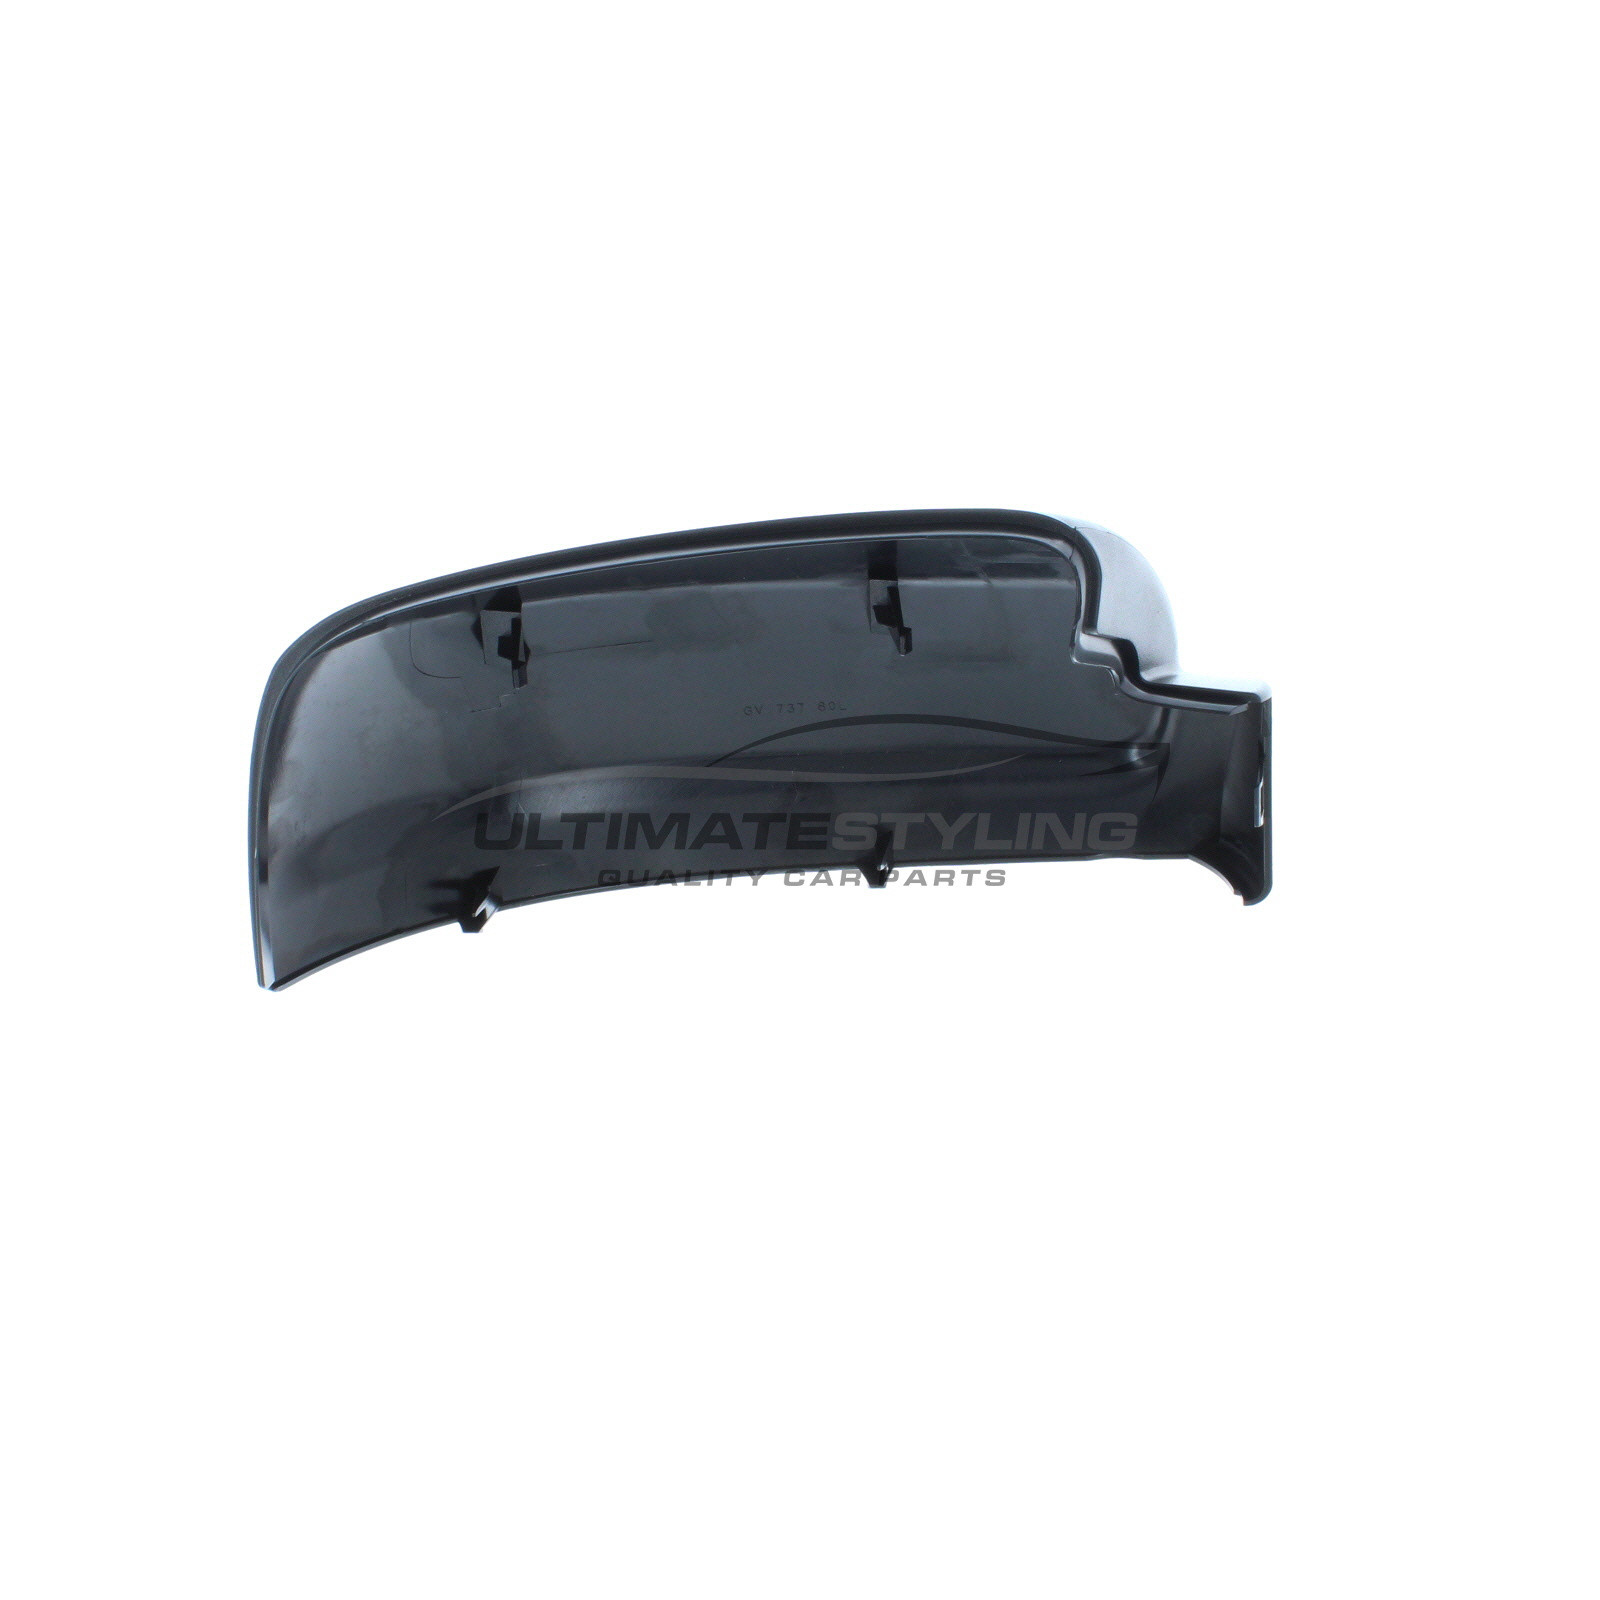 Mercedes Benz Vito 2010-2016 Wing Mirror Cover Cap Casing Black (Textured)  Passenger Side (LH) to suit Mirror without Indicator